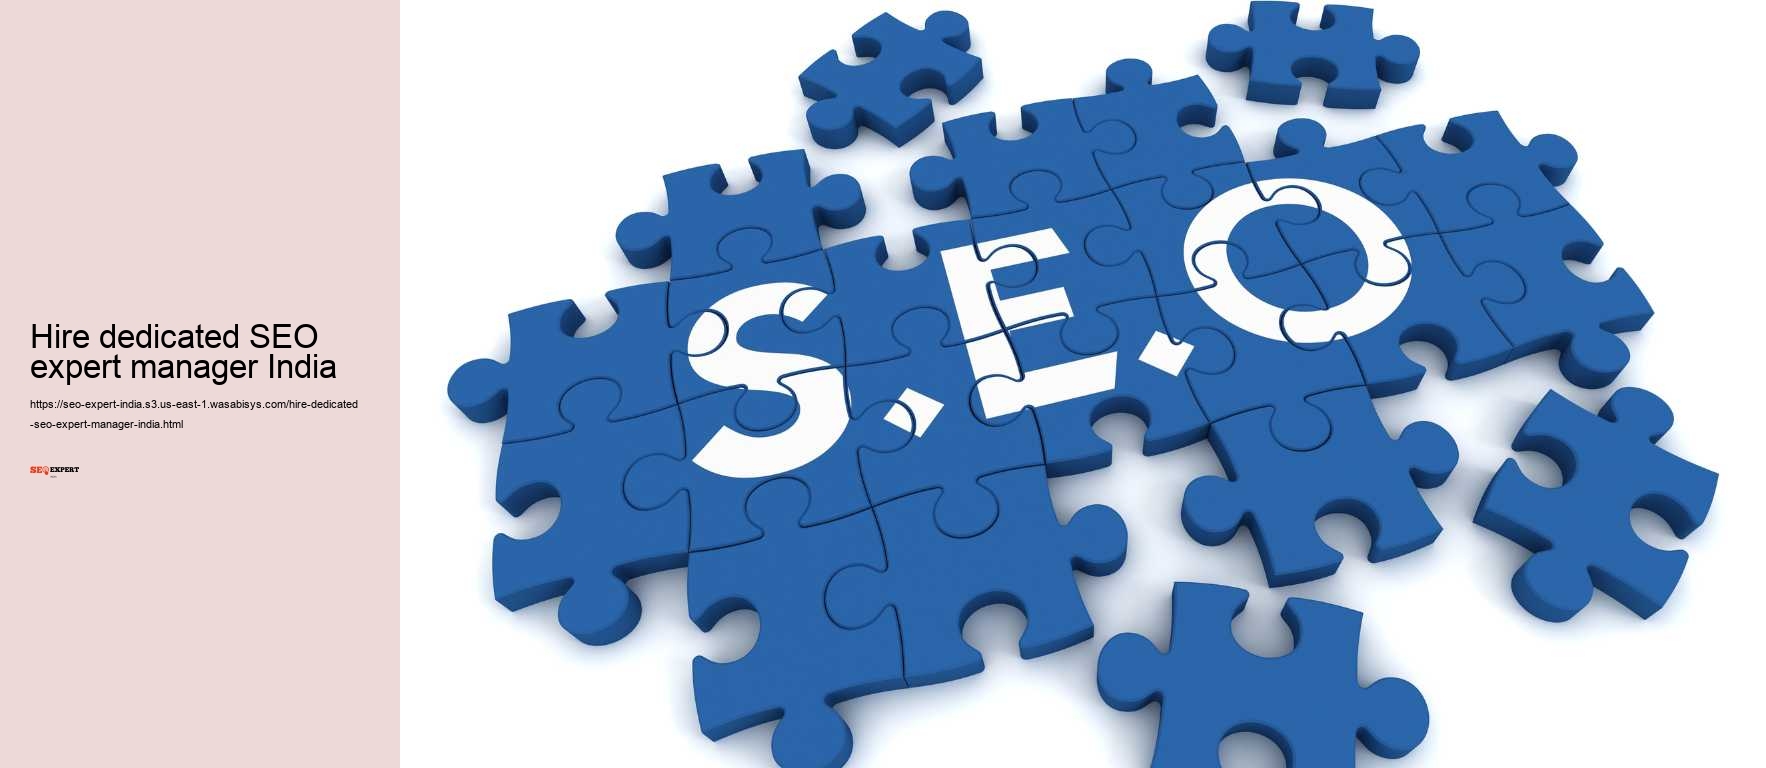 Hire dedicated SEO expert manager India